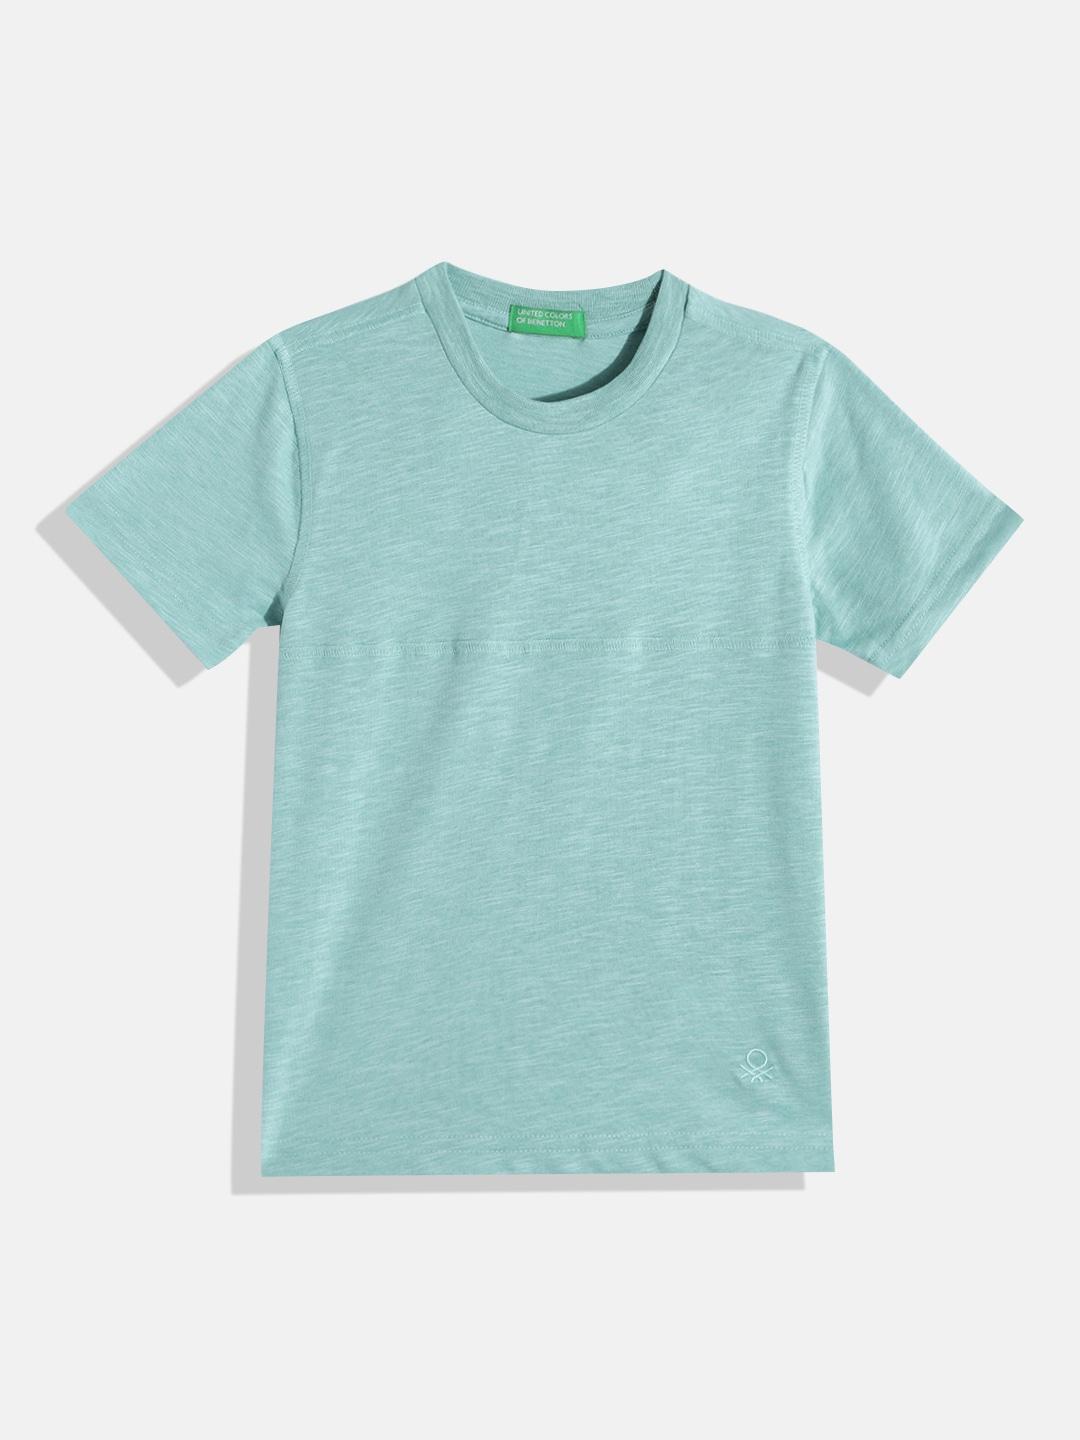 united-colors-of-benetton-boys-solid-t-shirt